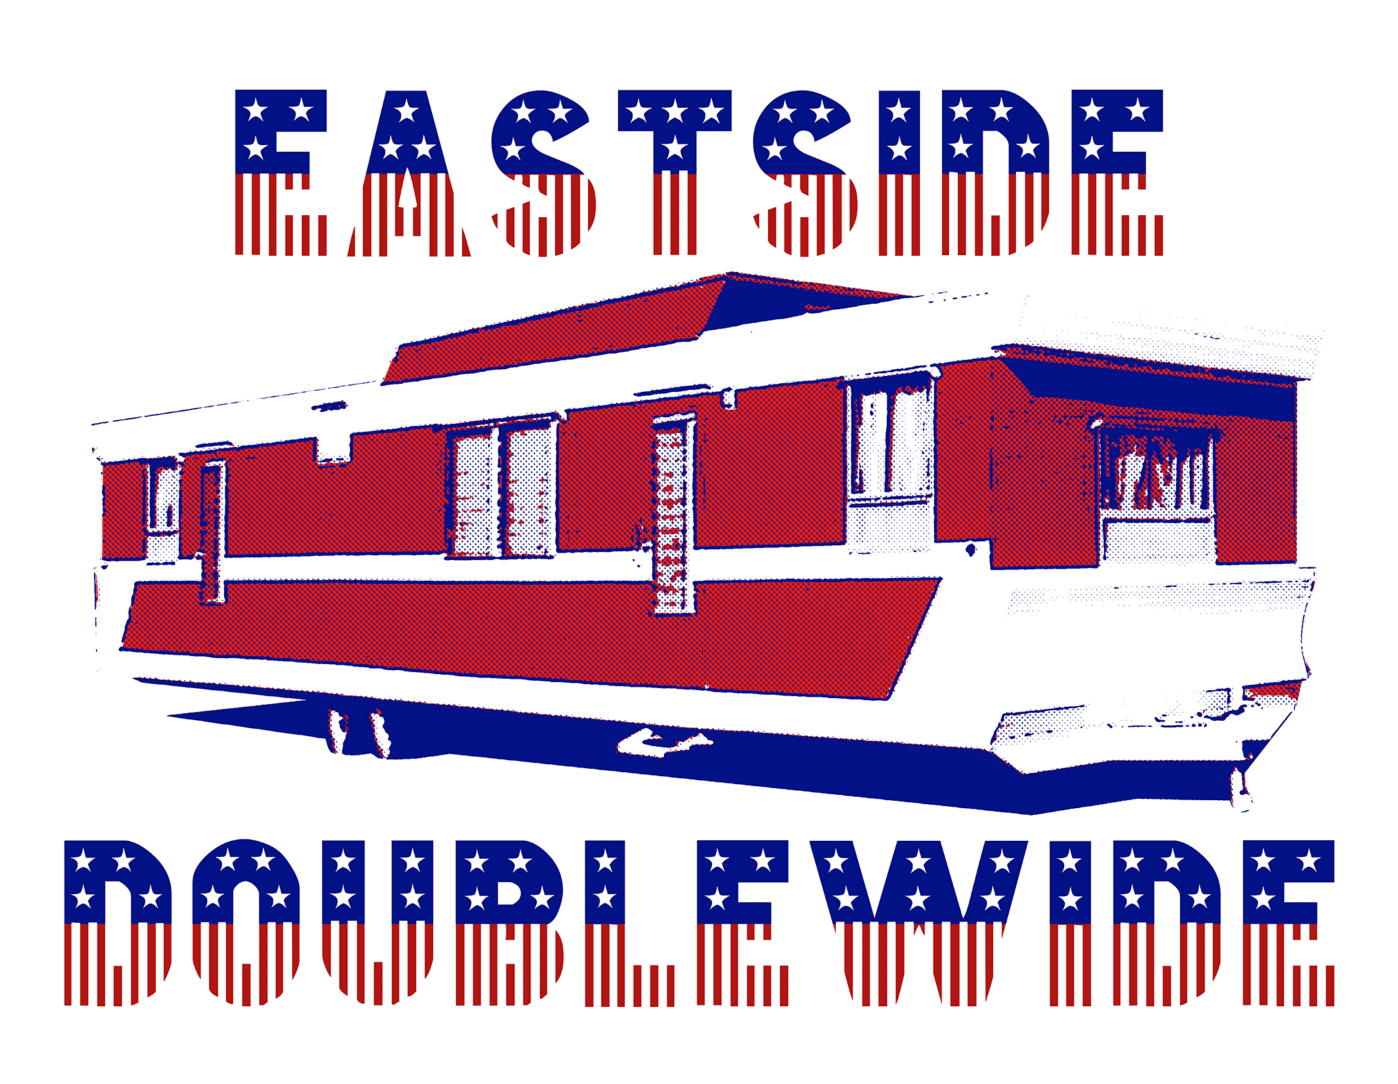 ANNOUNCING: The Eastside Doublewide at SXSW